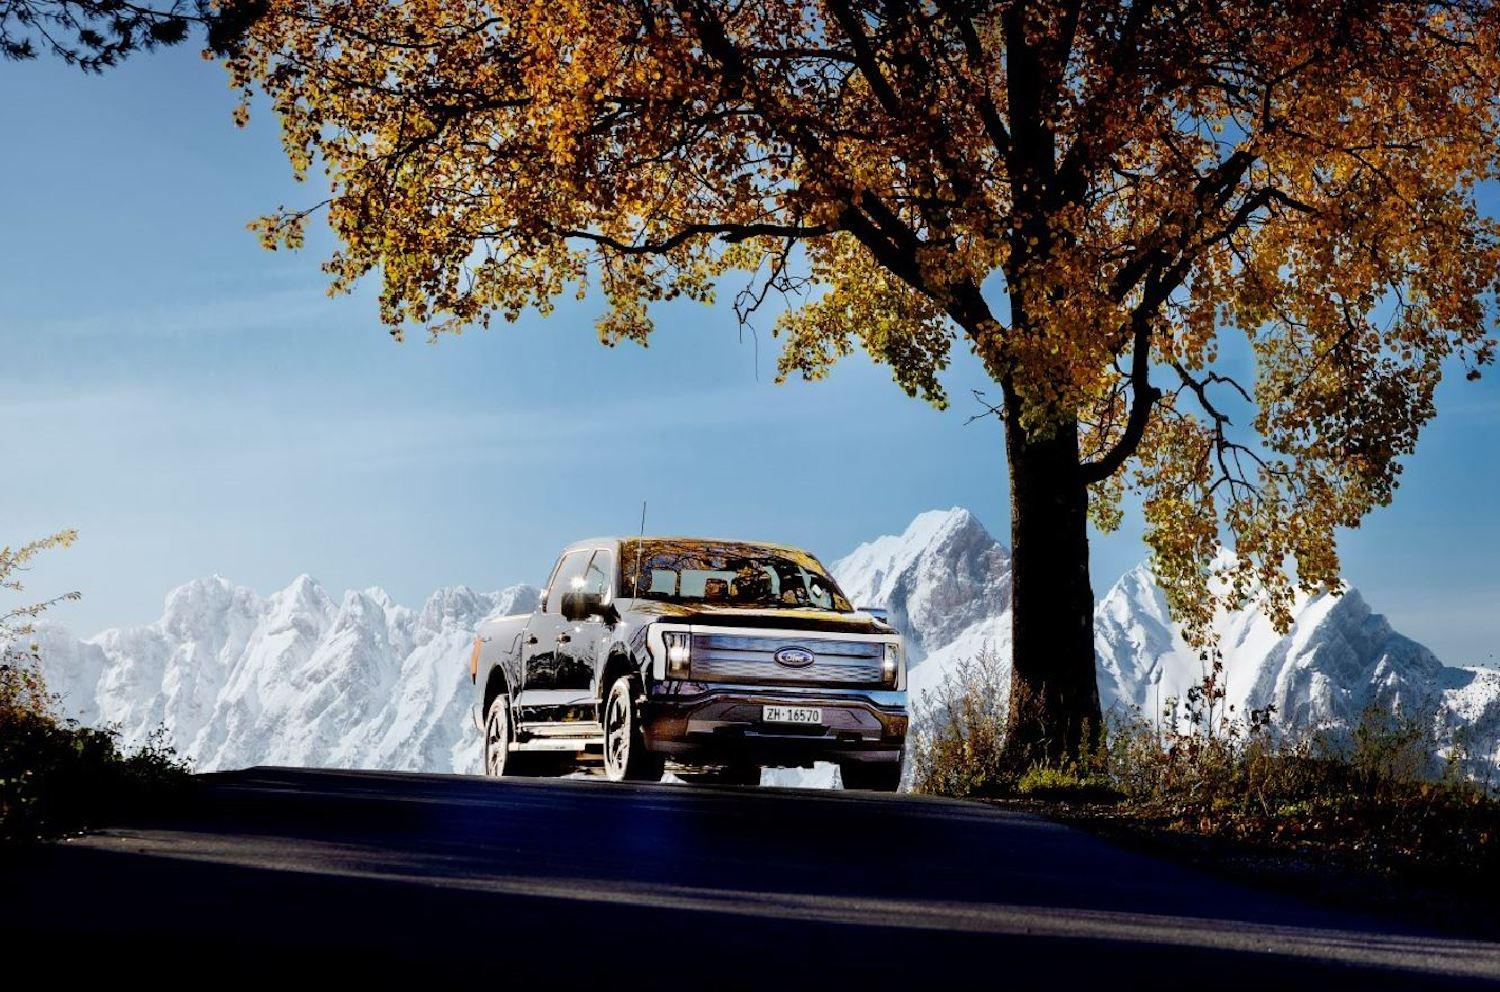 Ford F-150 Lightning F-150 Lightning Launching in Switzerland Next Month with 127,000 CHF Pricing 02_Ford F-150 Lightning Lariat_Low Res.JPG